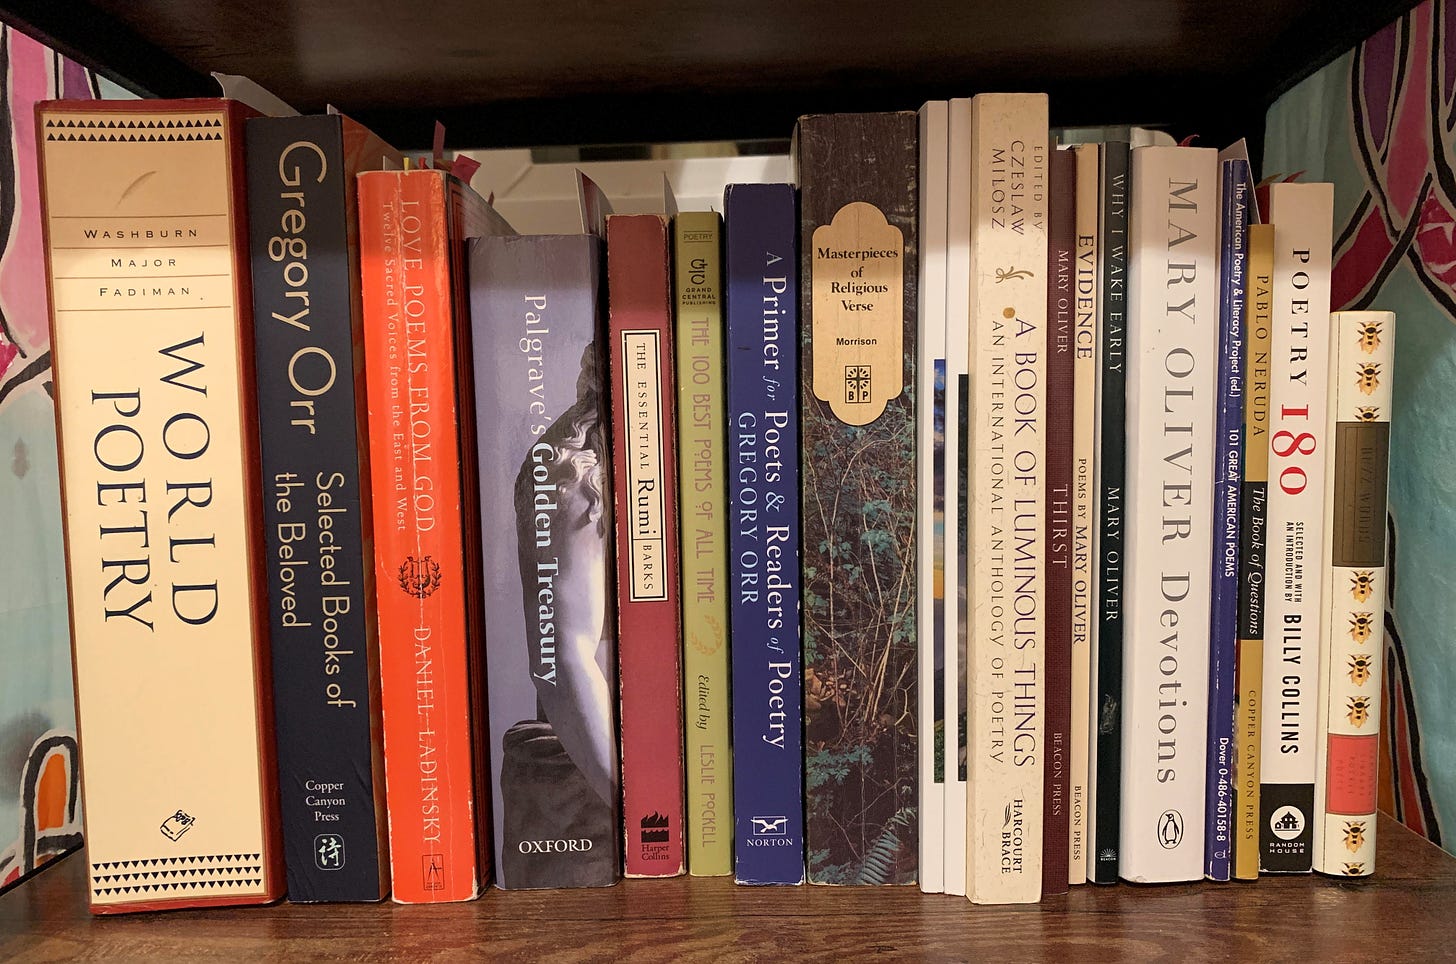 A collection of fat and thin poetry books standing upright on a shelf.